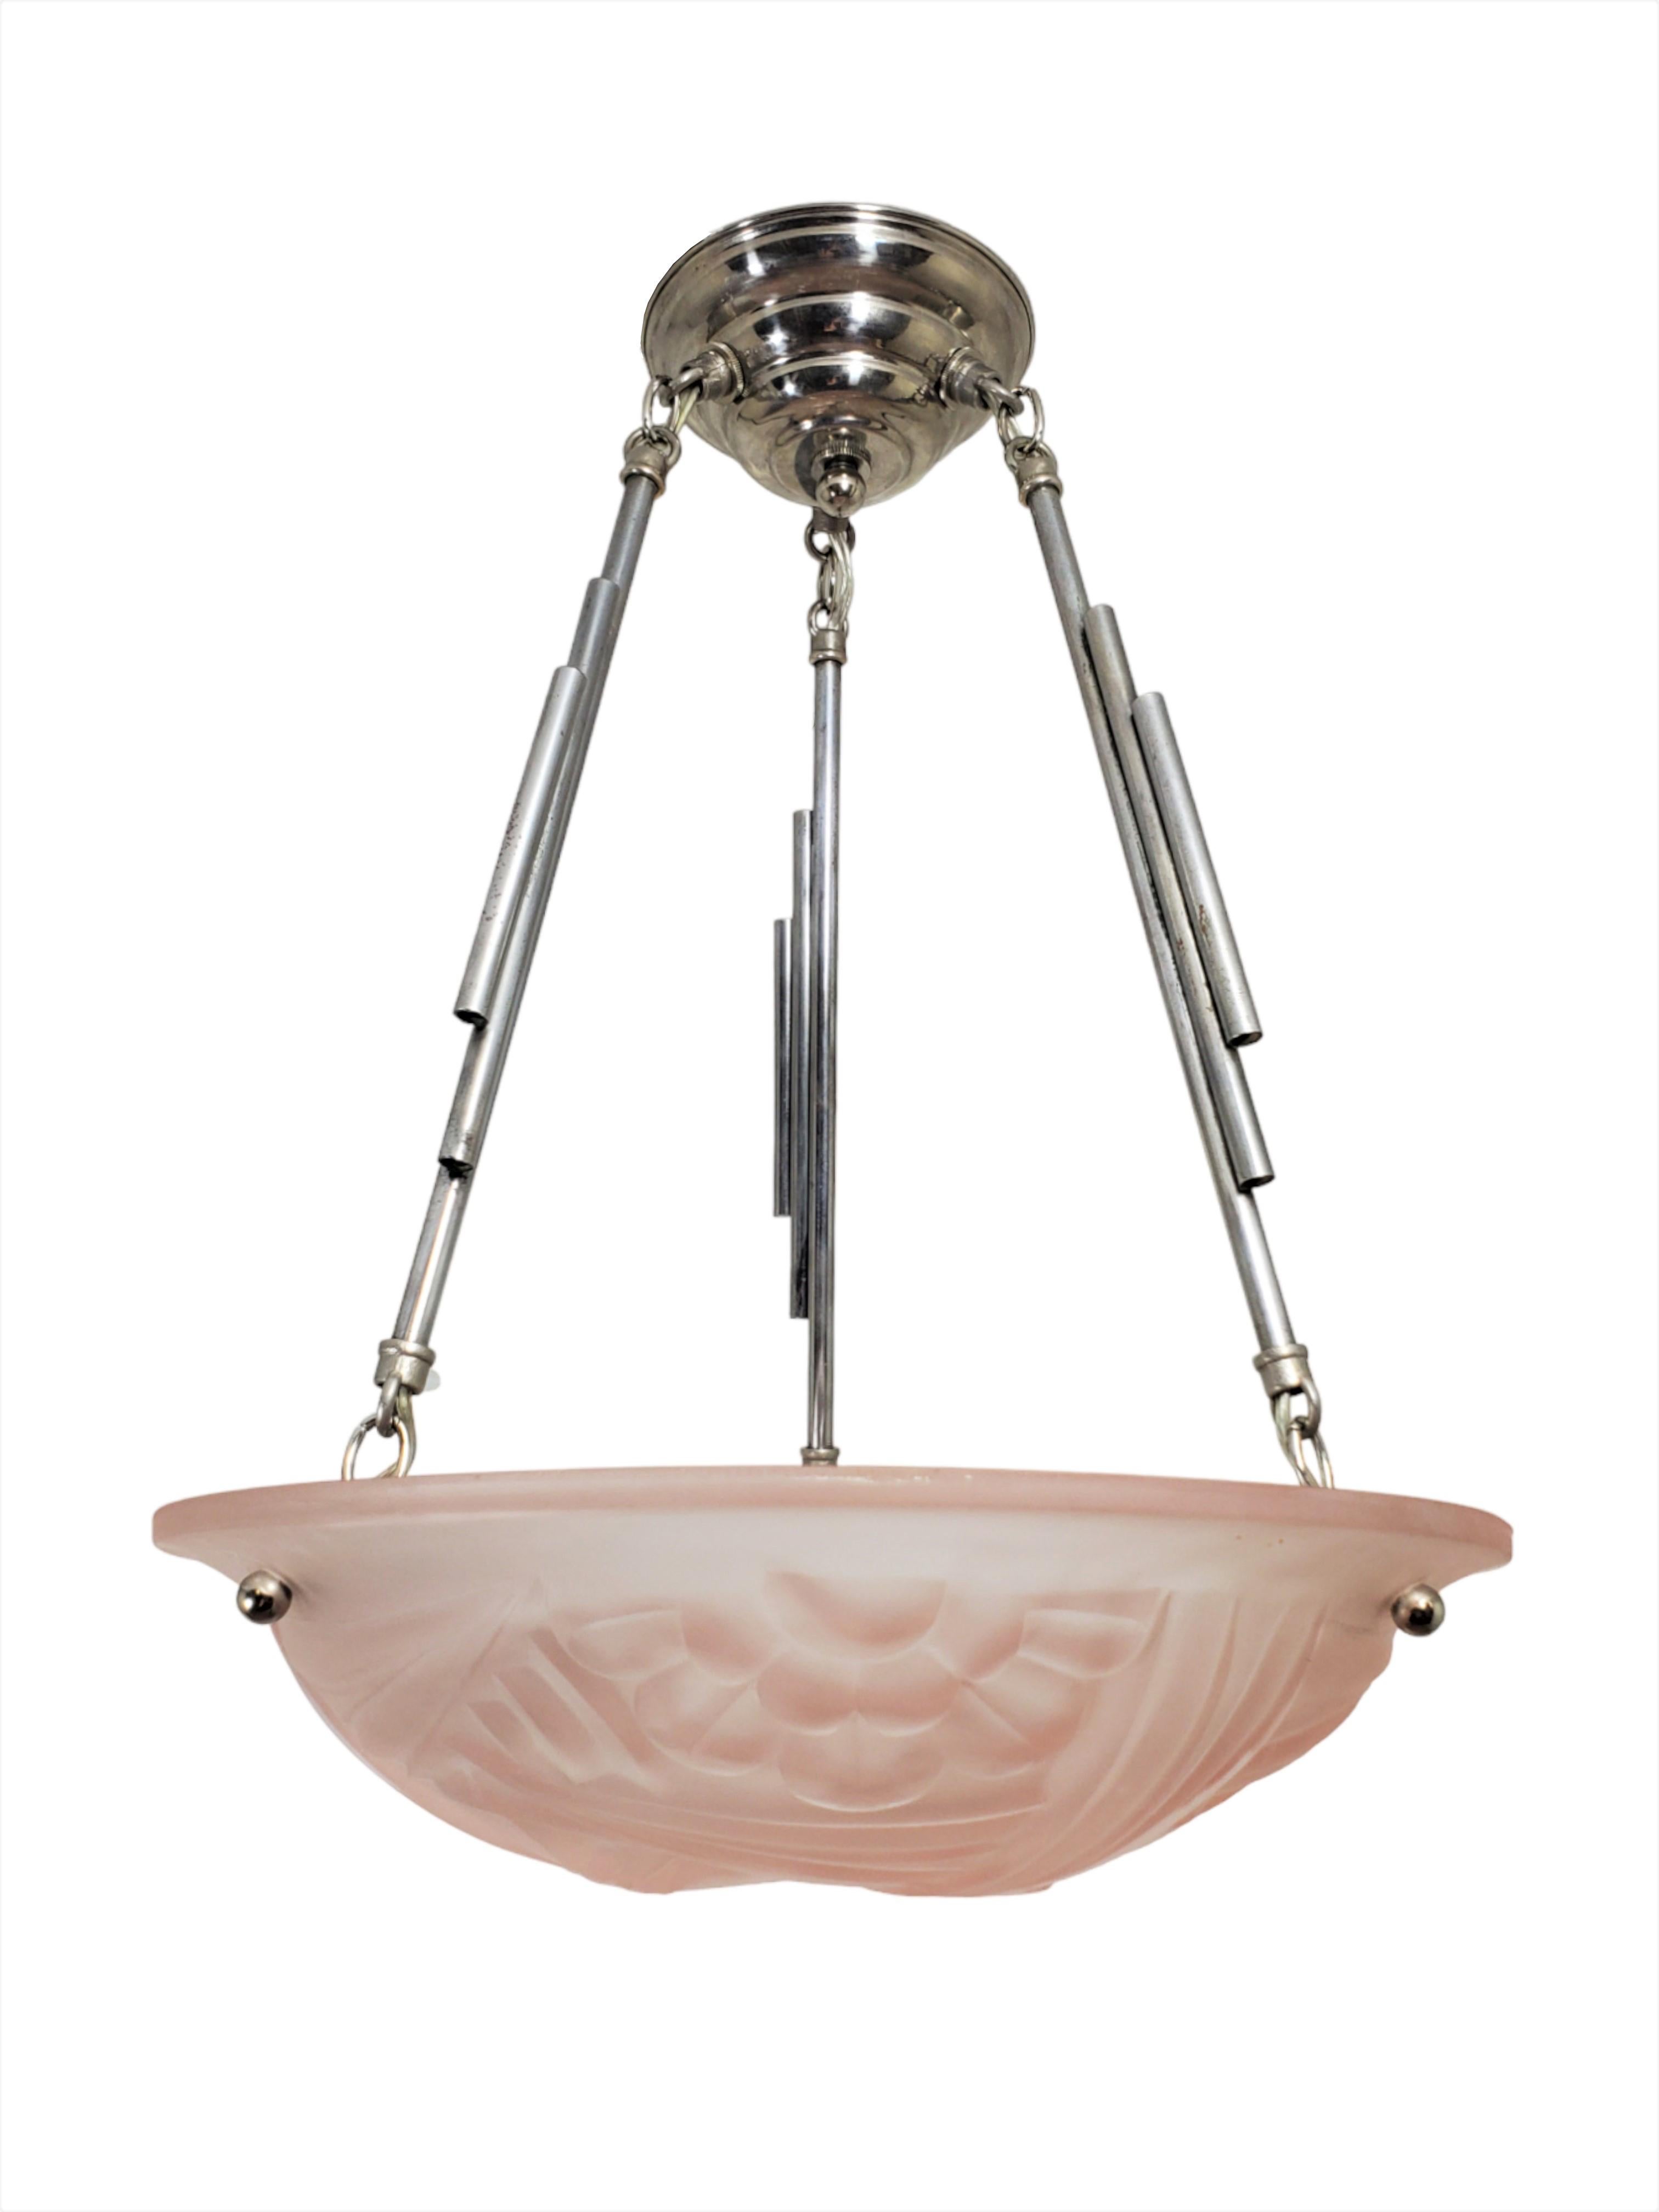 An original French Art Deco chandelier in light pink / blush frosted art glass signed Degue. The coupe showcases elegant stylized floral motifs that have been gracefully partitioned by angular, blade-like motifs. This round pendant /fixture is